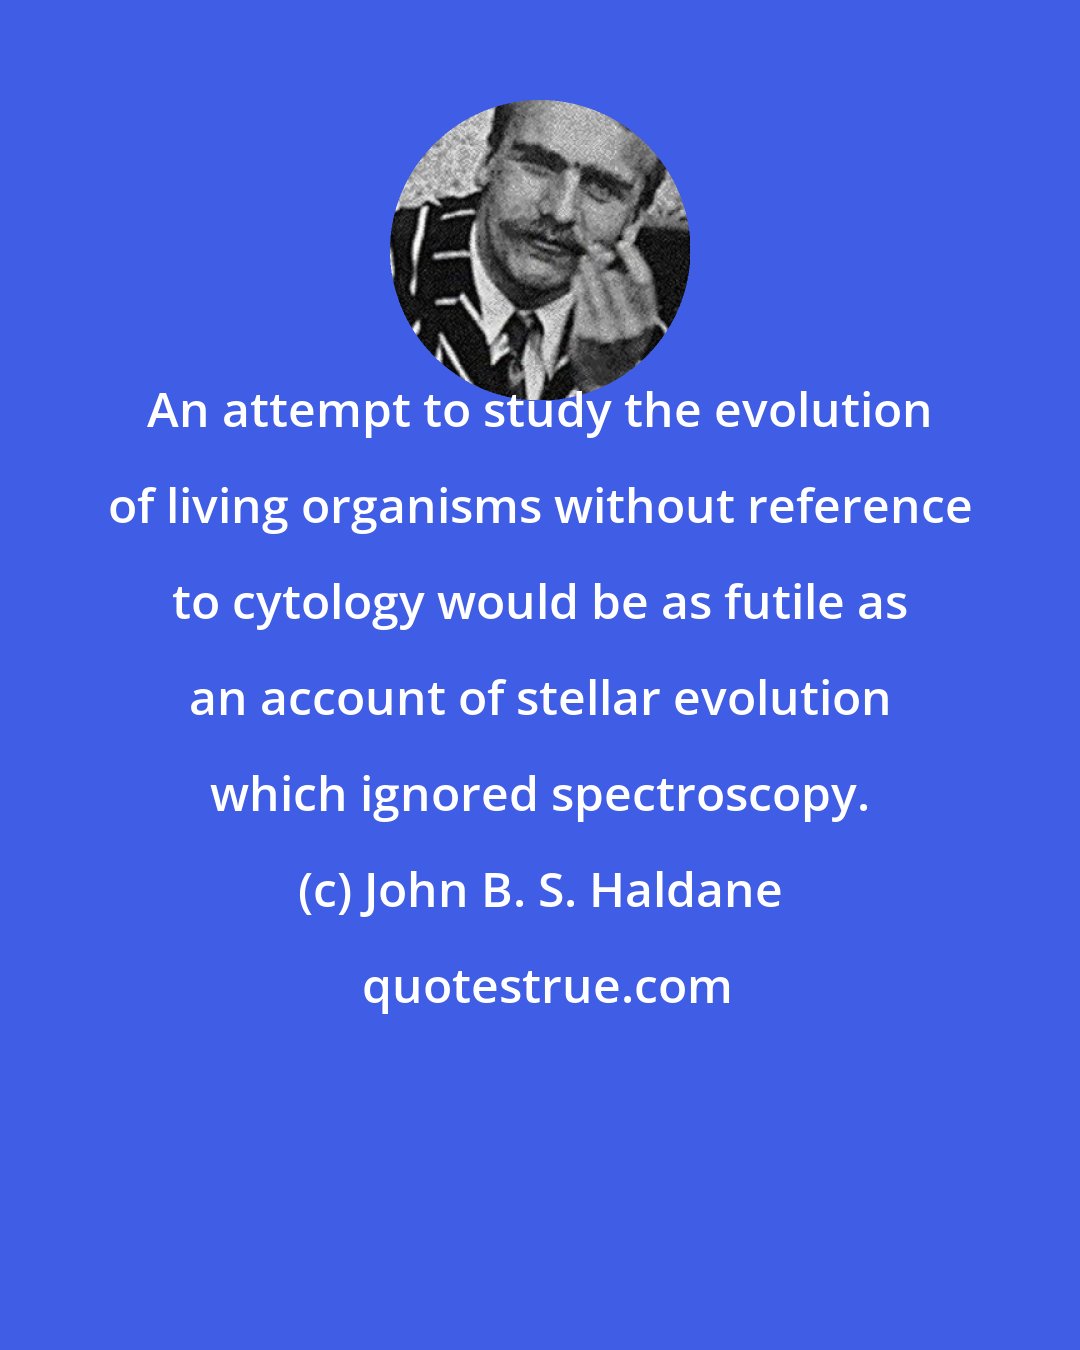 John B. S. Haldane: An attempt to study the evolution of living organisms without reference to cytology would be as futile as an account of stellar evolution which ignored spectroscopy.